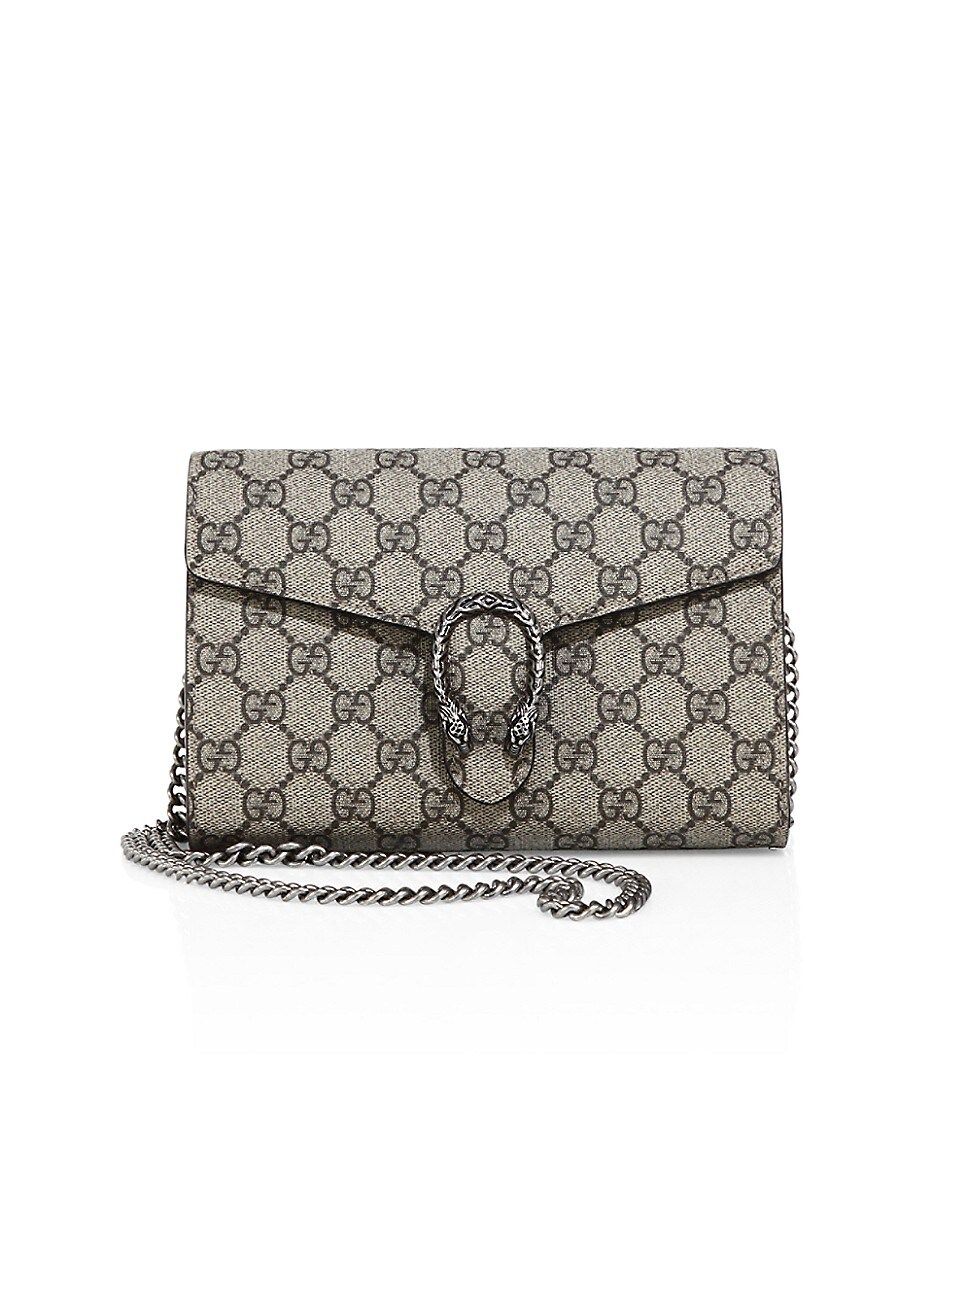 Gucci Dionysus GG Supreme Chain Wallet | Saks Fifth Avenue